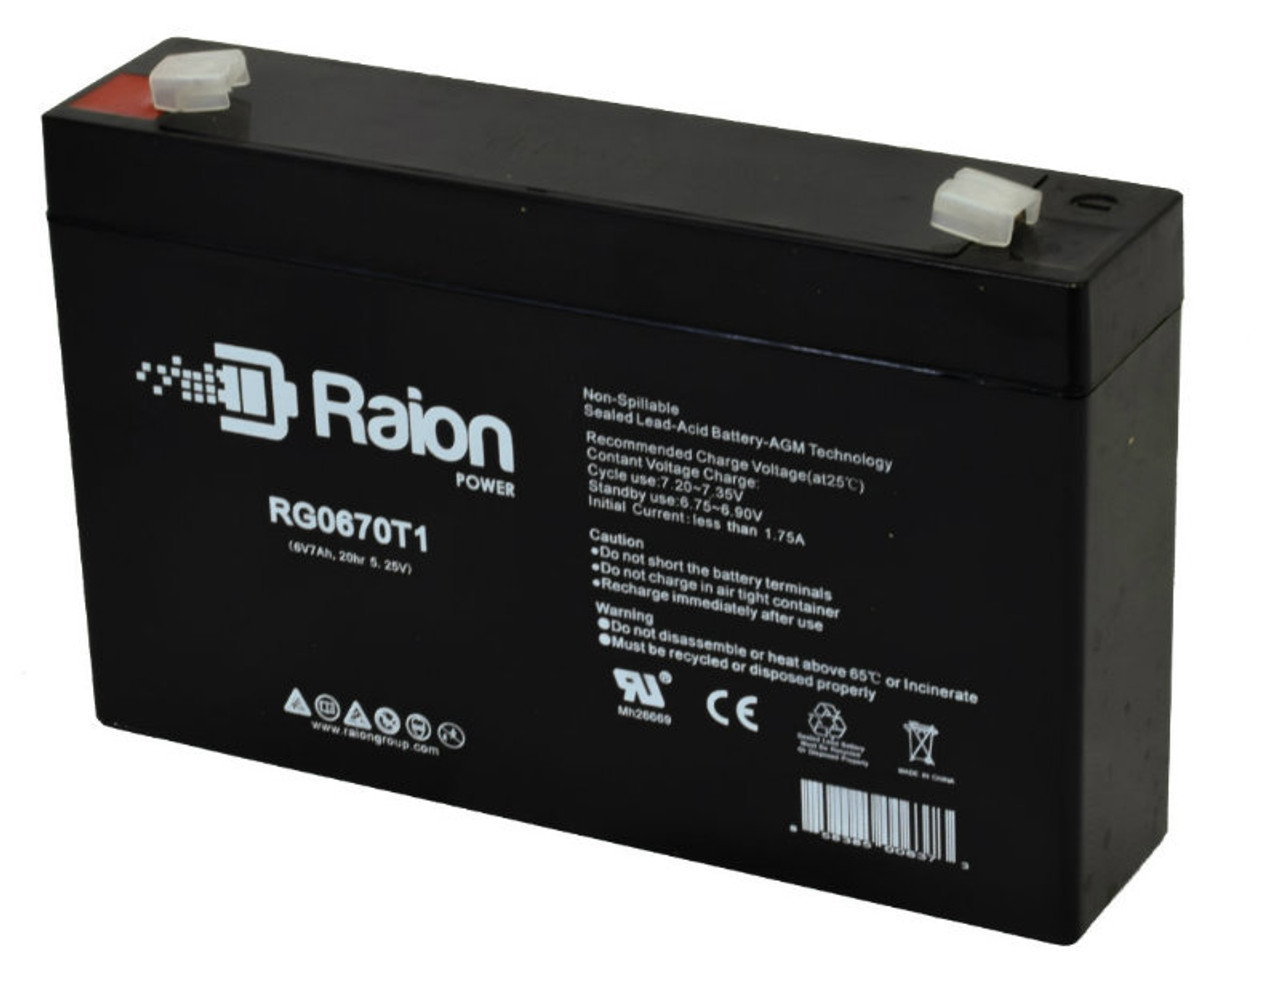 Raion Power RG0670T1 6V 7Ah Replacement Emergency Light Battery for Light Alarms LL6